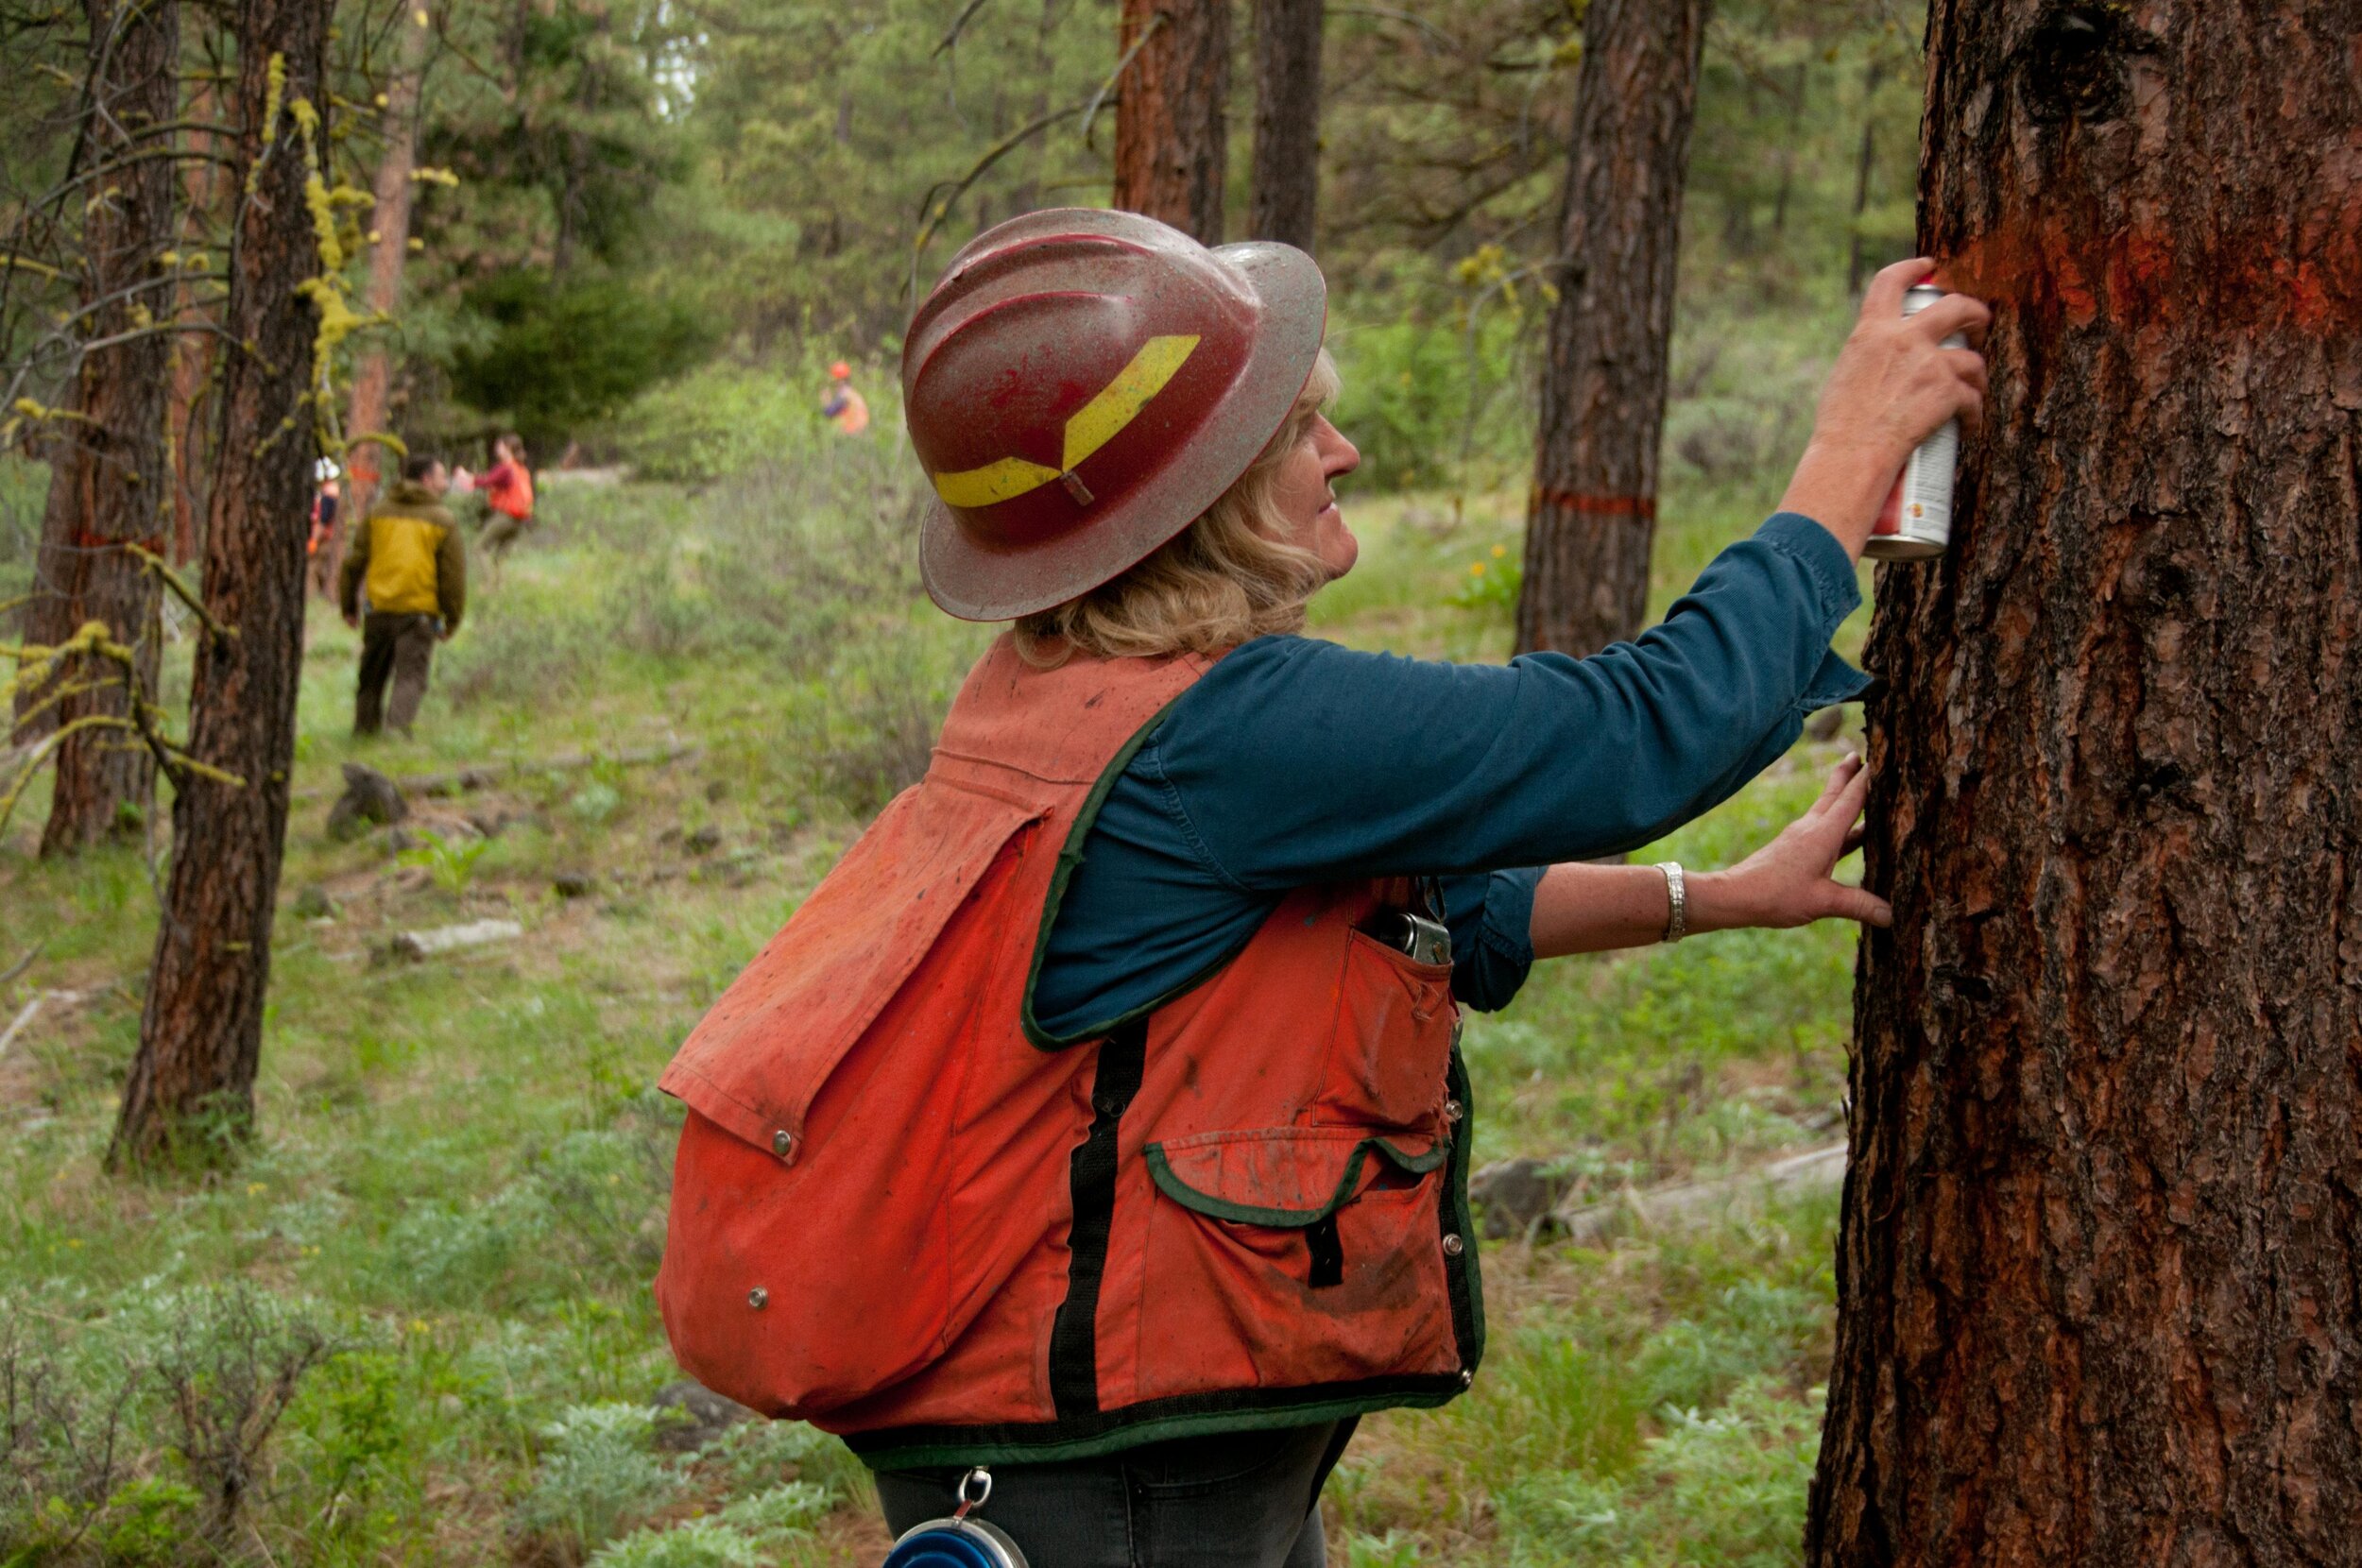  Participants mark trees at a forestry workshop near Cle Elum in the Central Cascades. Photo by Hannah Letinich. 